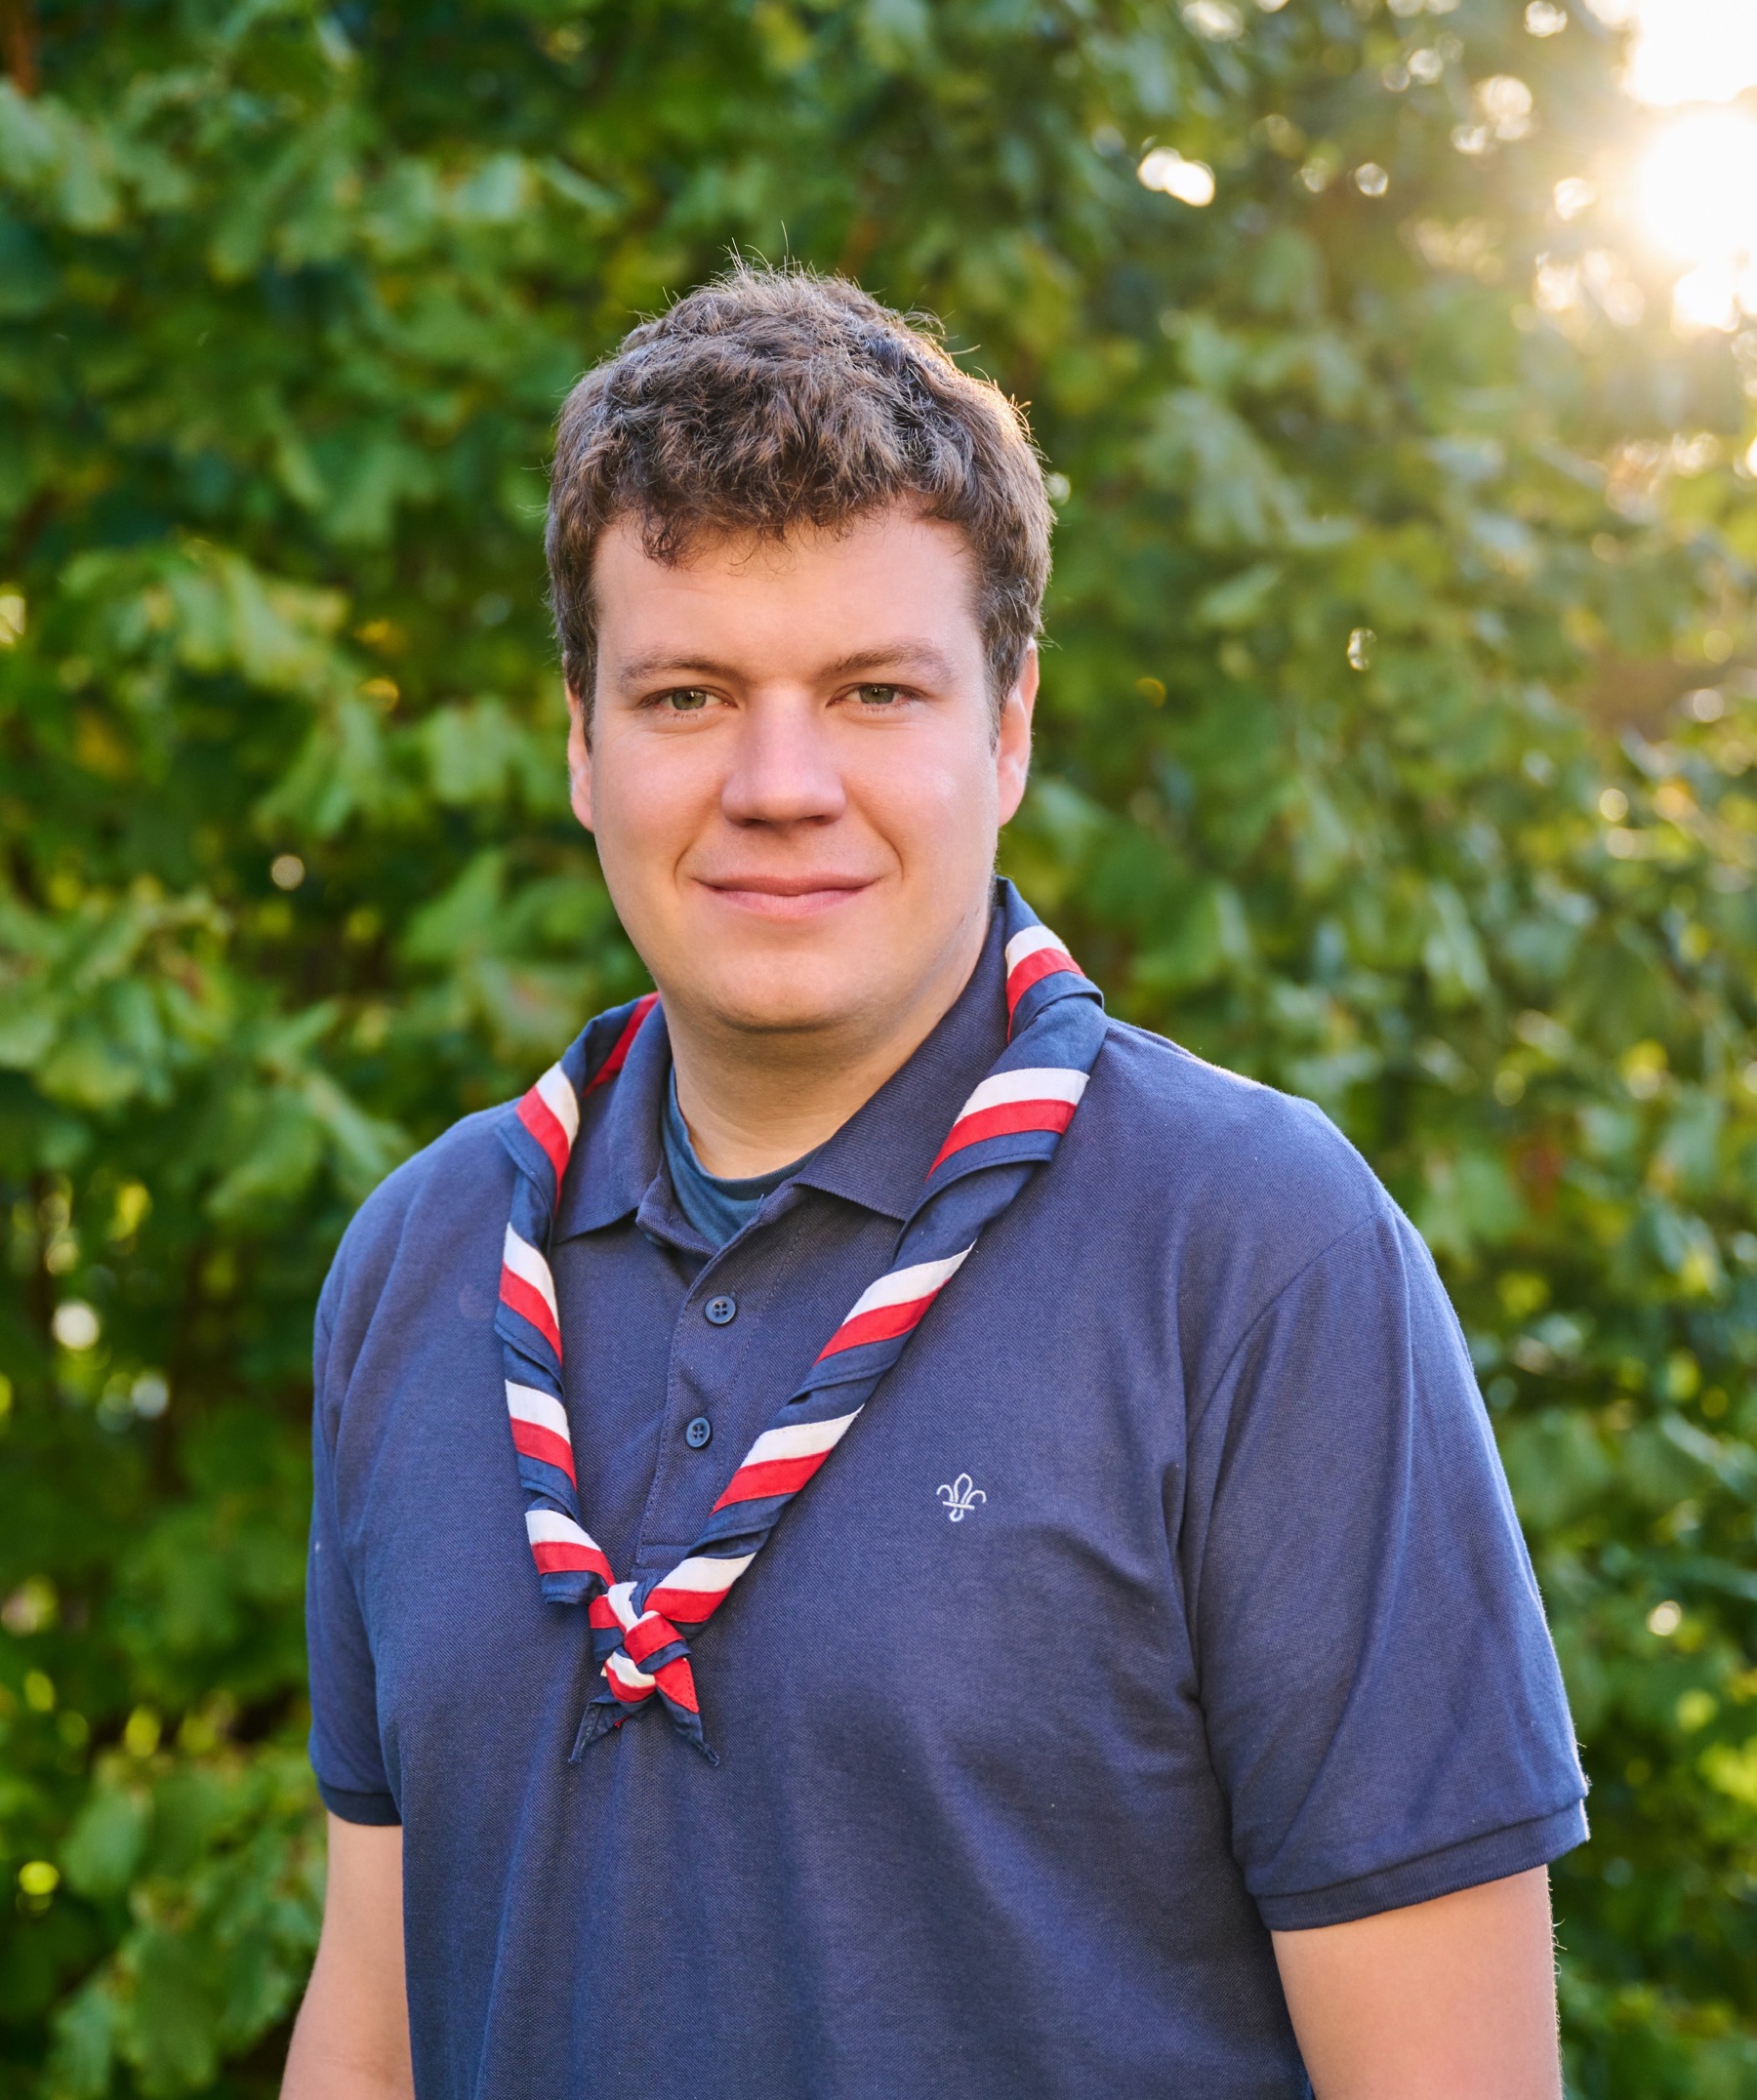 Jack Caine, UK Commissioner for People, in a blue, white and red necker at Gilwell Park